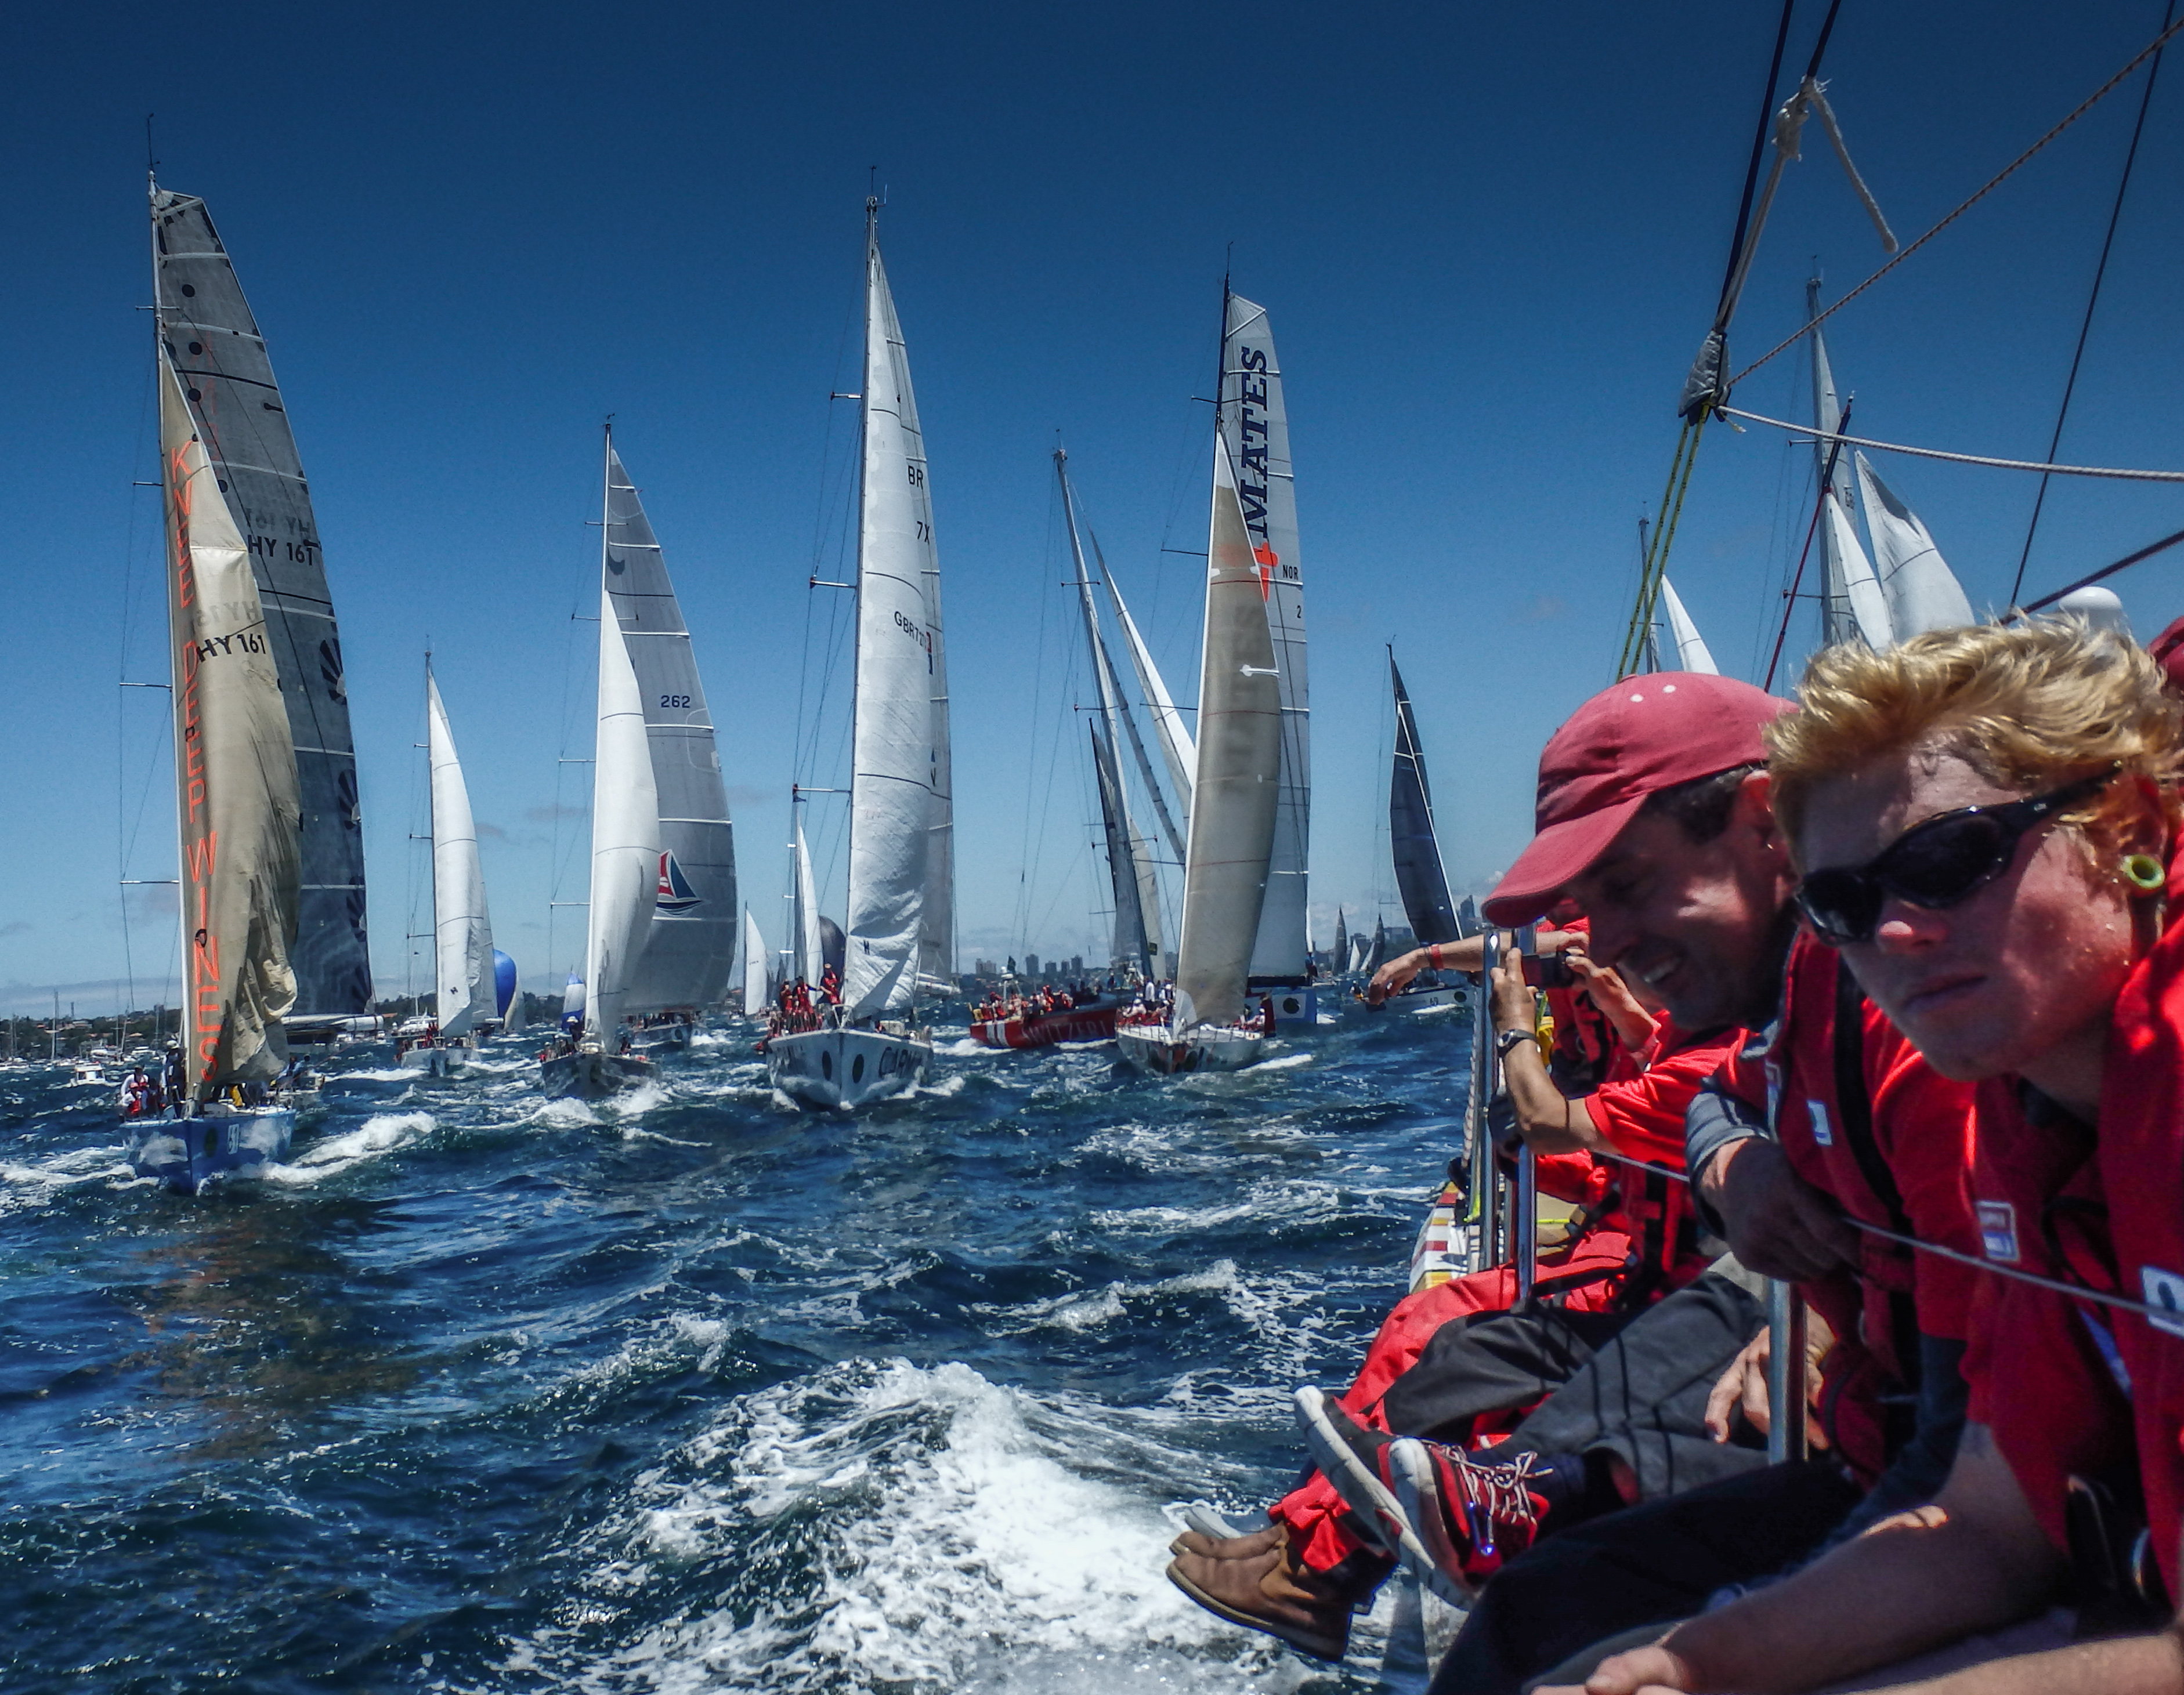 Clipper Ventures 10 ready to race in 70th Rolex Sydney Hobart Yacht Race